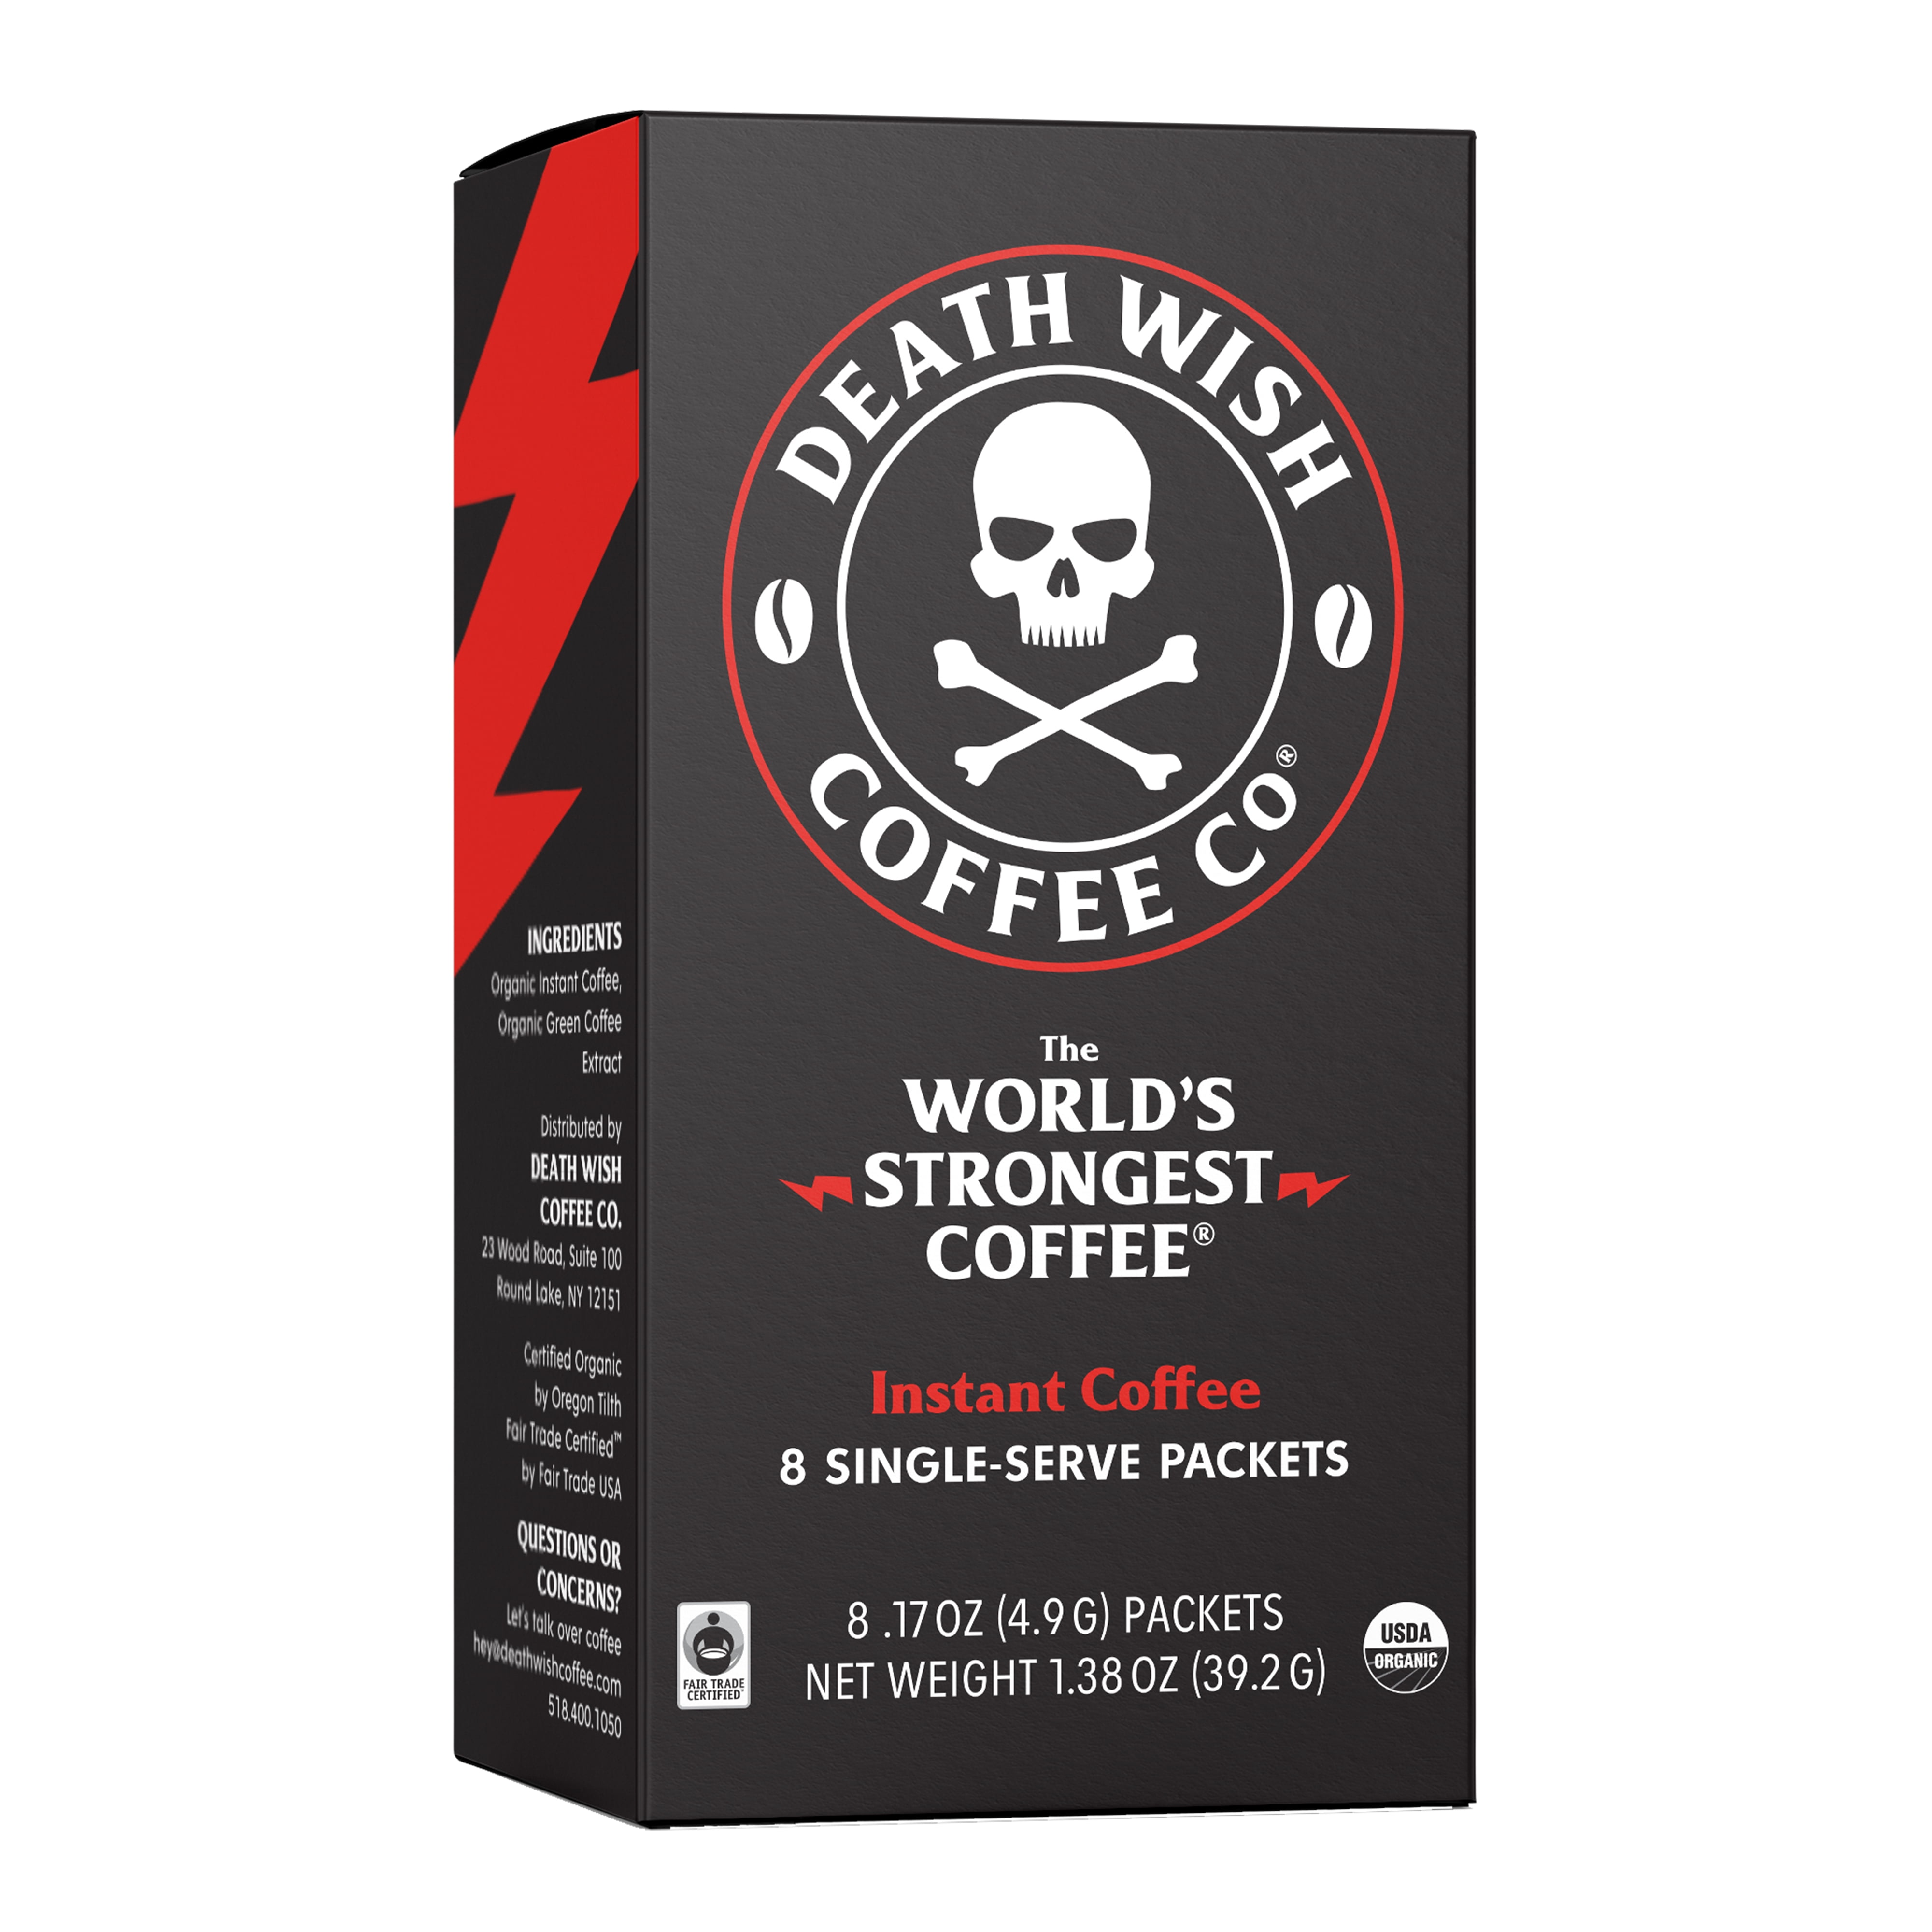 Death Wish Is A Strong Local Coffee!